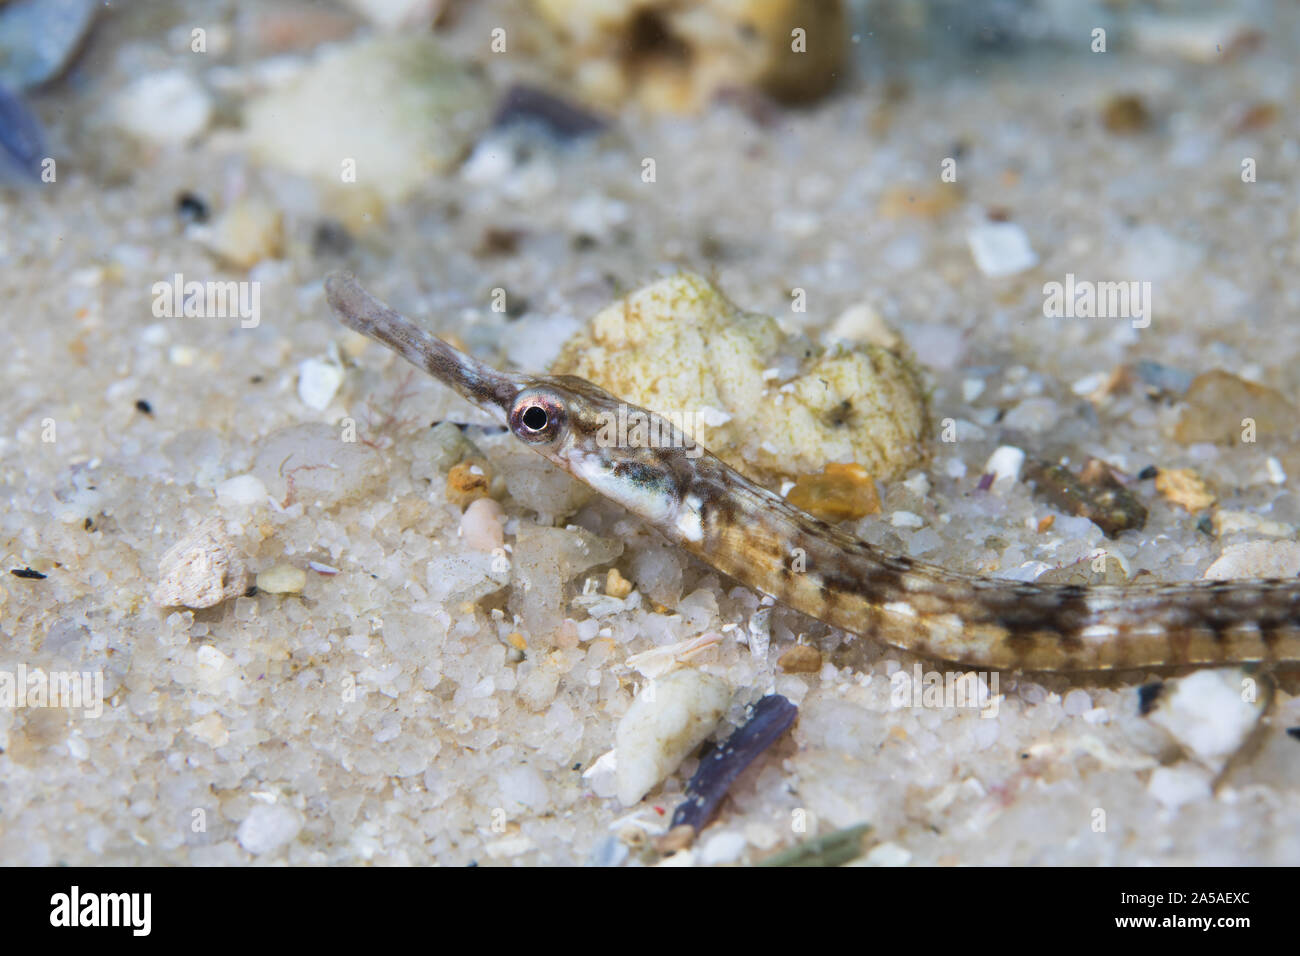 Longsnout pipefish (Syngnathus temminckii) on the ocean floor side view. Stock Photo